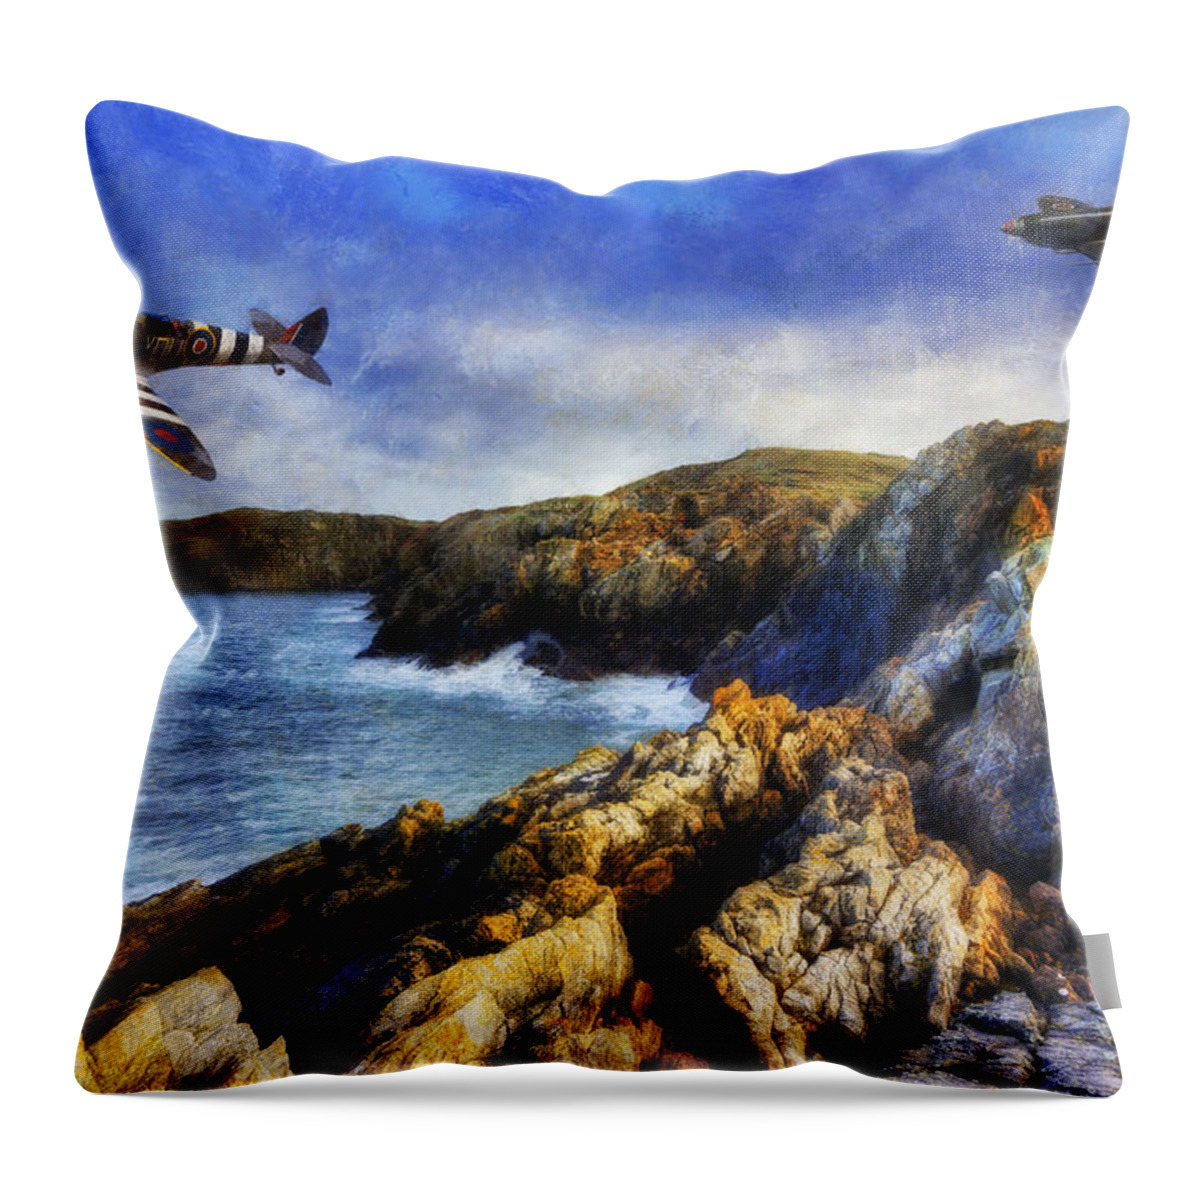 War Throw Pillow featuring the photograph Spitfire On The Coast by Ian Mitchell